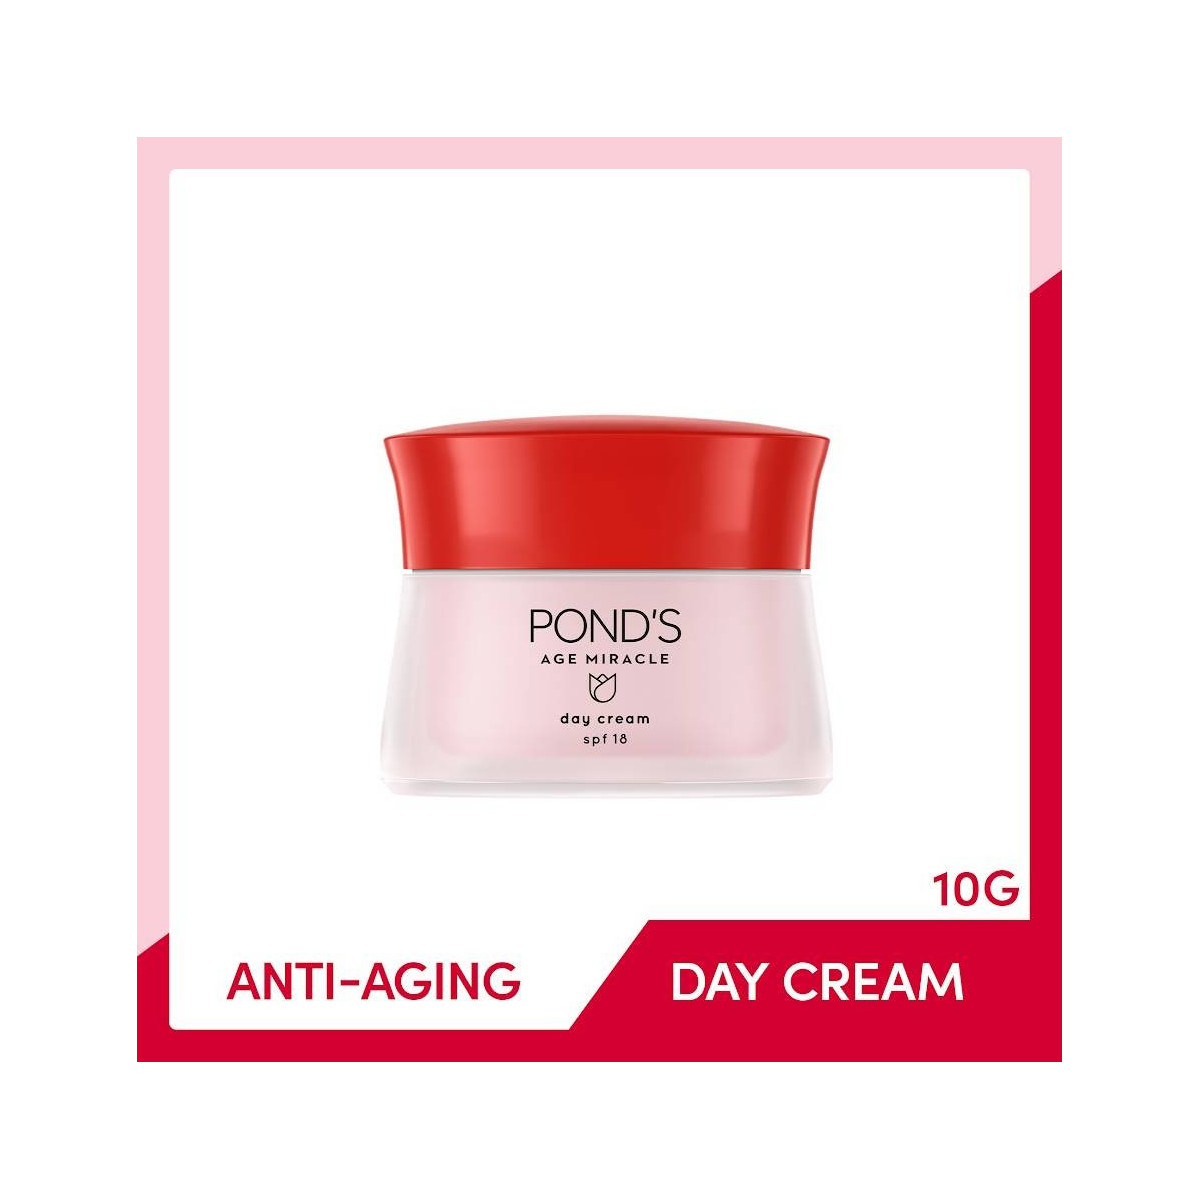 POND'S Age Miracle Anti Aging Day Cream SPF 18 with Retinol C and Niacinamide for Skin Renewal 10g